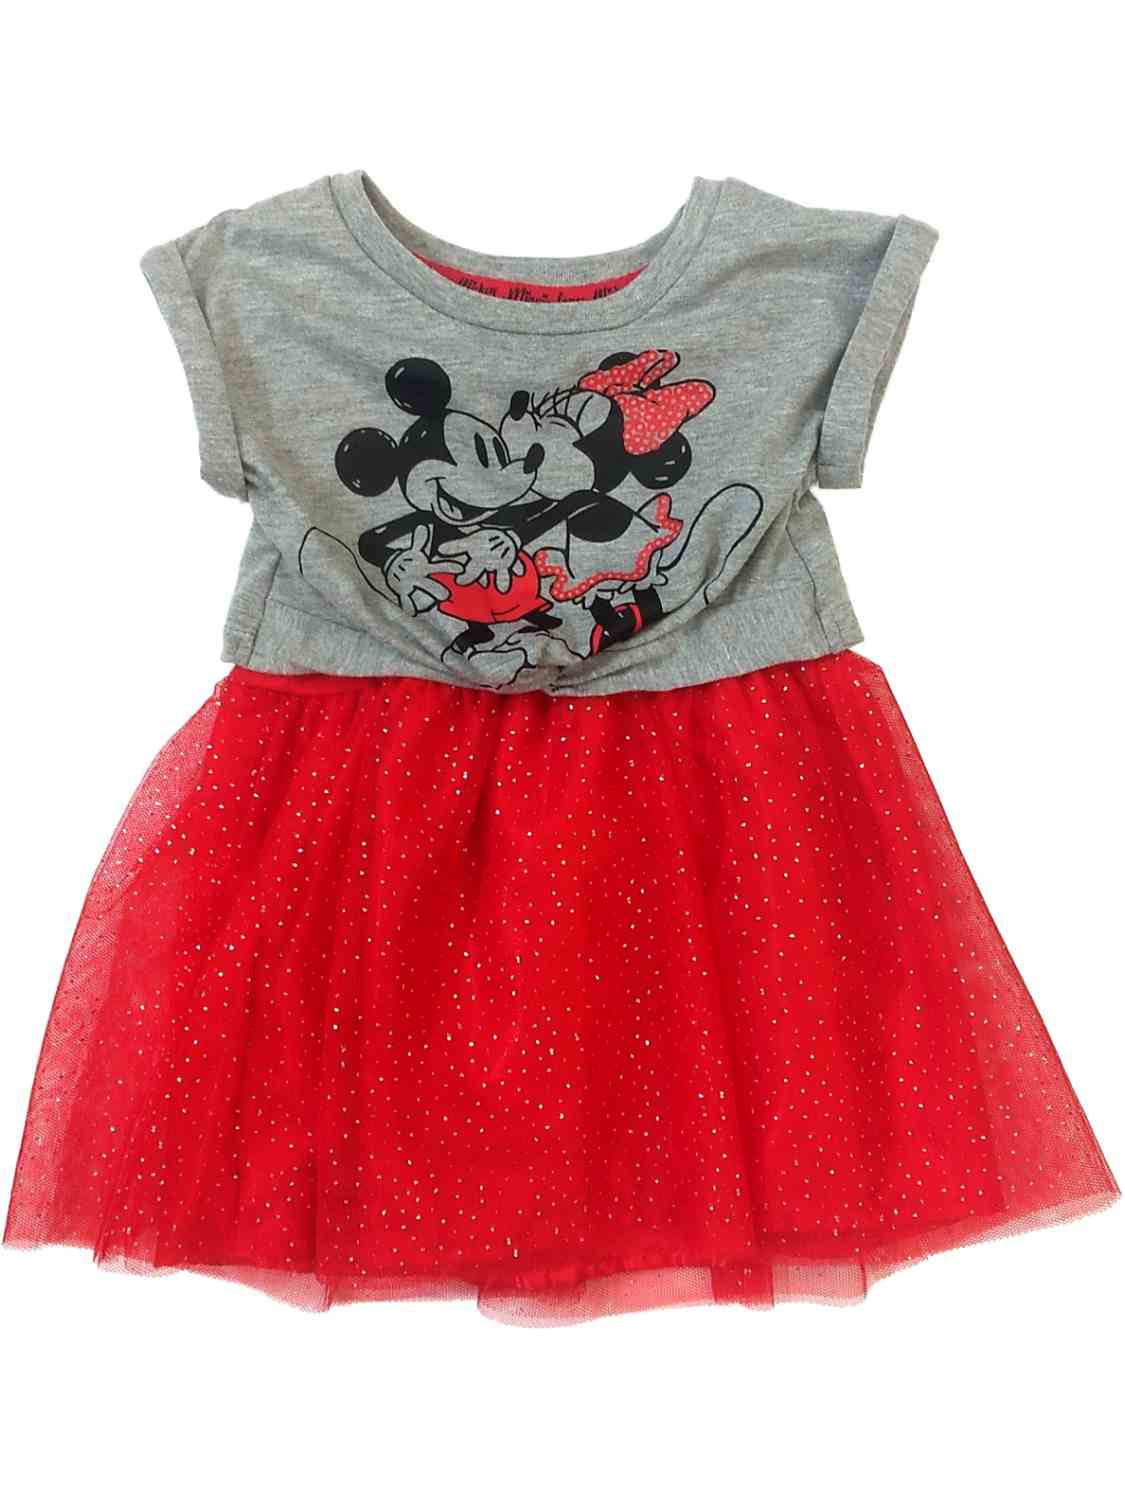 Red Mickey Mouse Minnie Mouse Costume for Infants